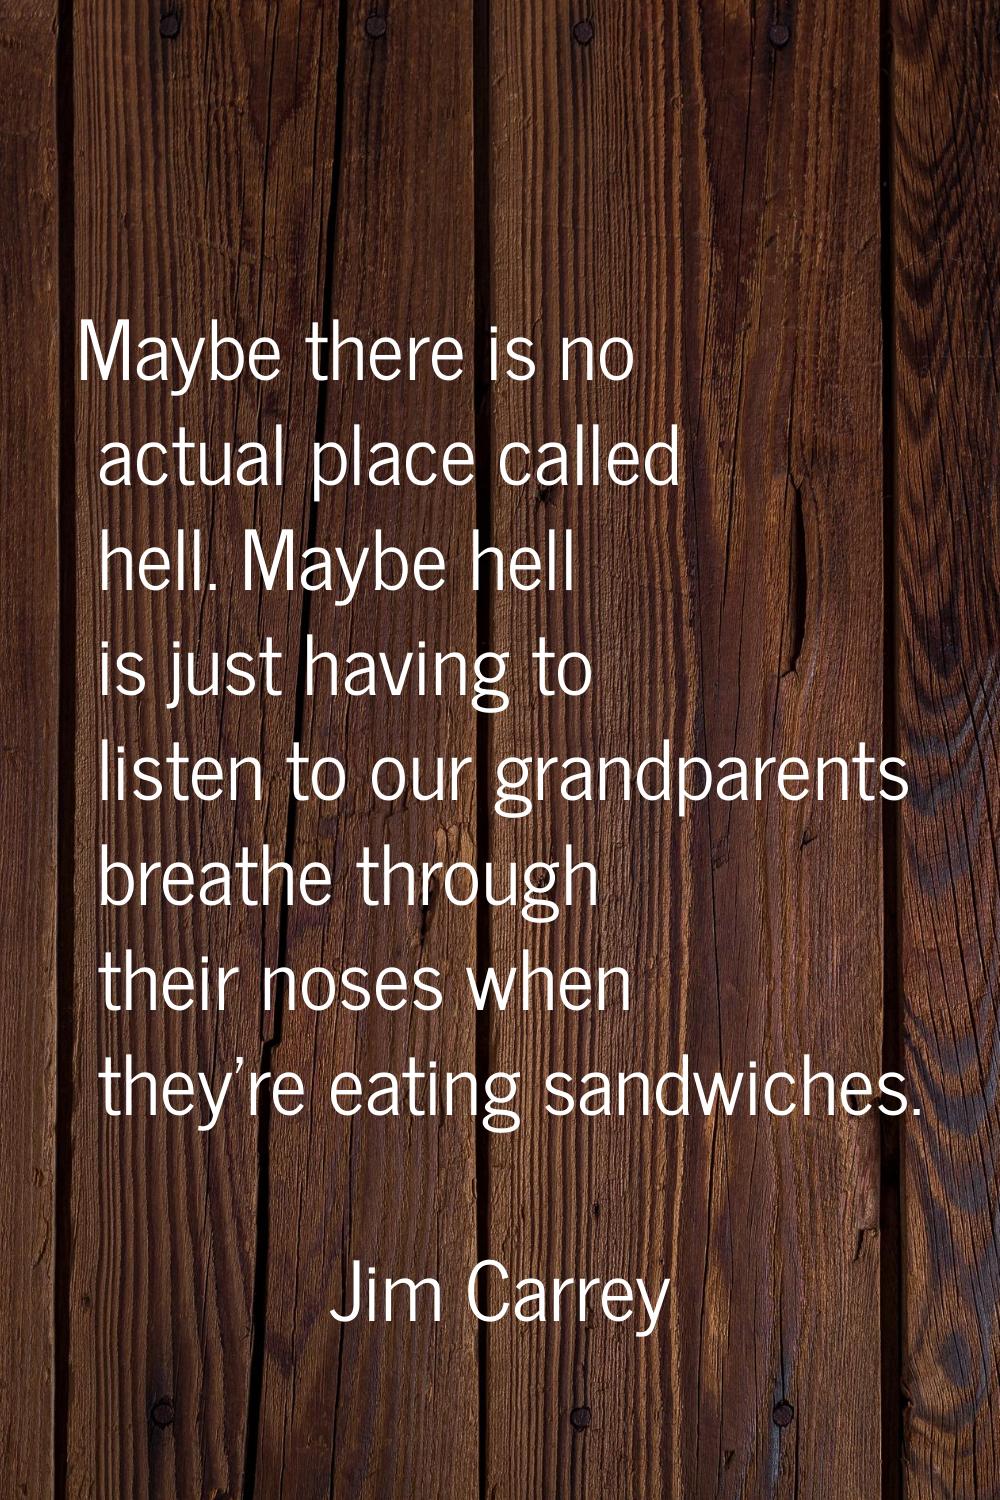 Maybe there is no actual place called hell. Maybe hell is just having to listen to our grandparents